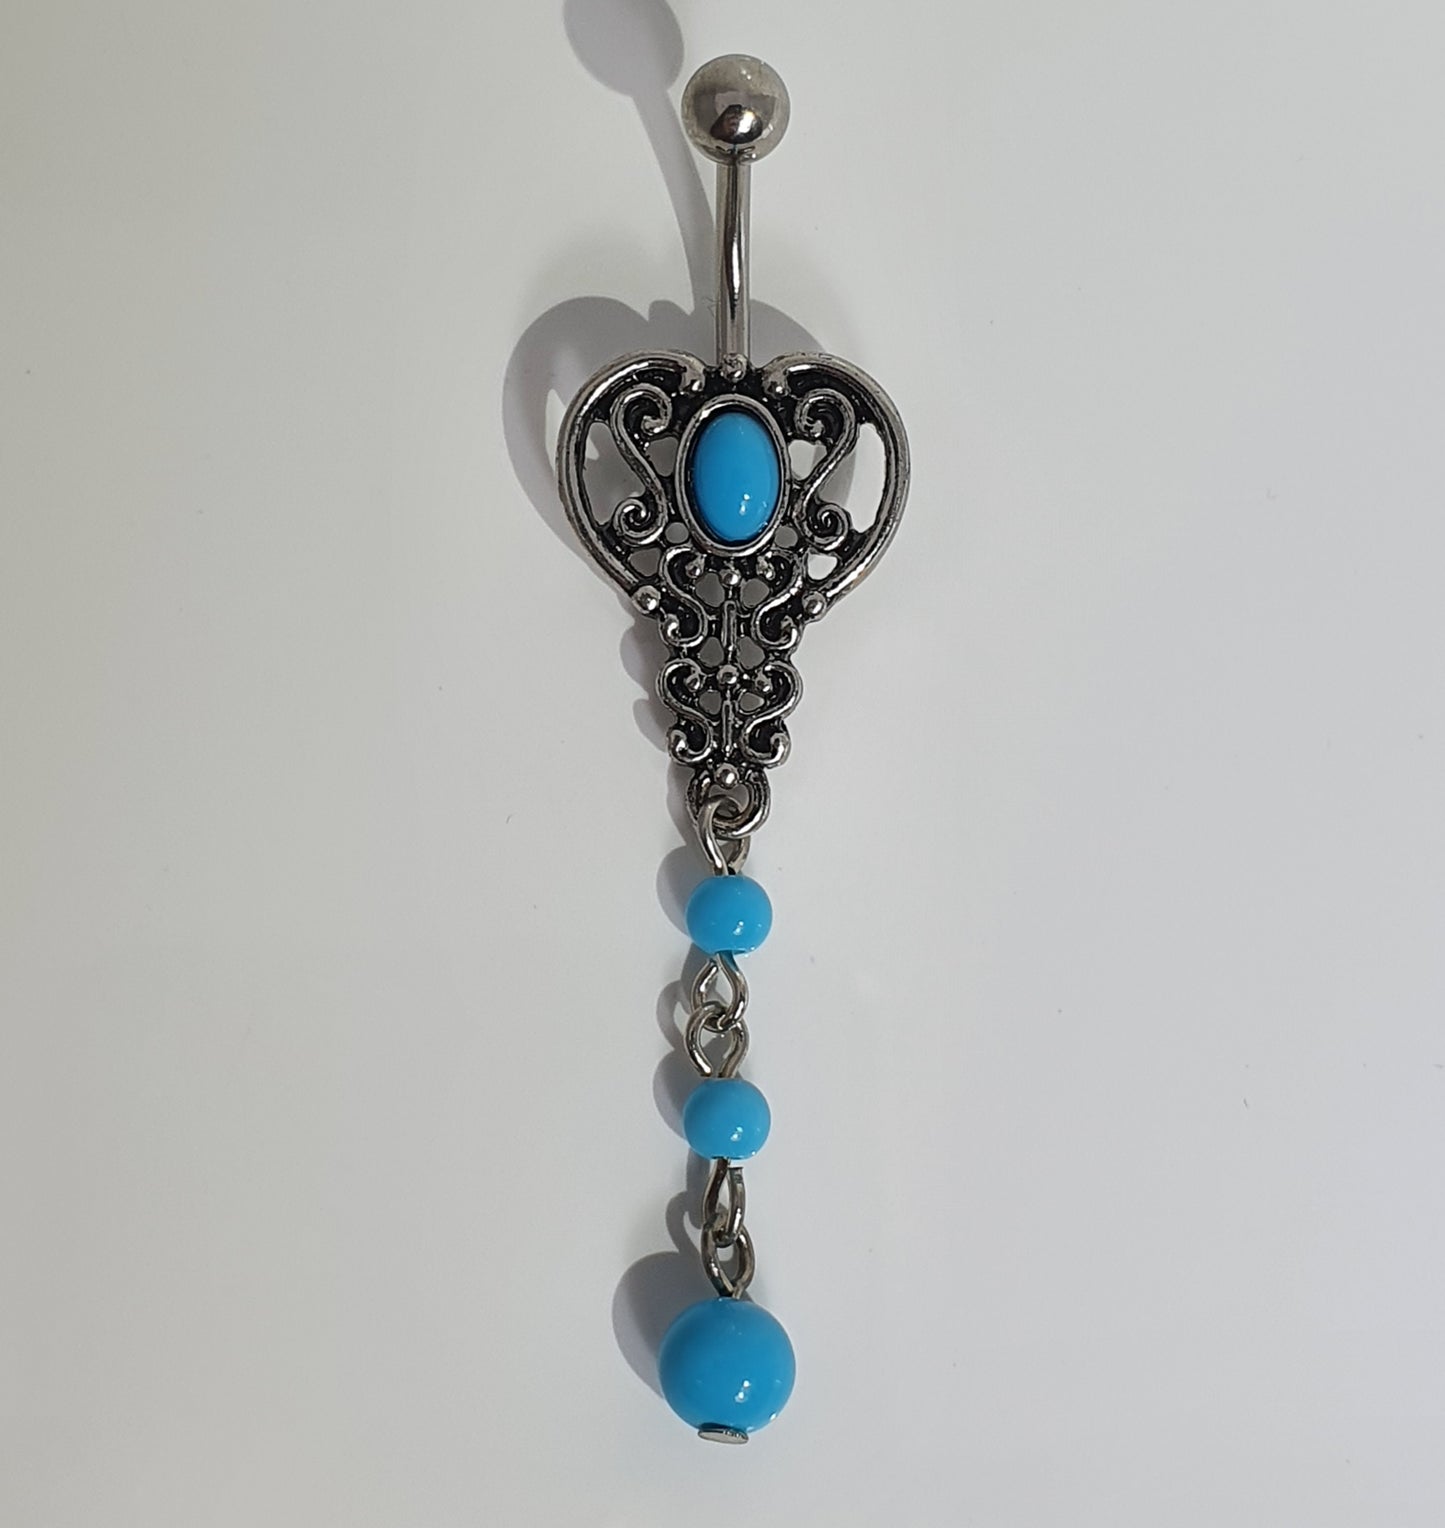 Turquoise Jewelled Navel Bar - various styles available